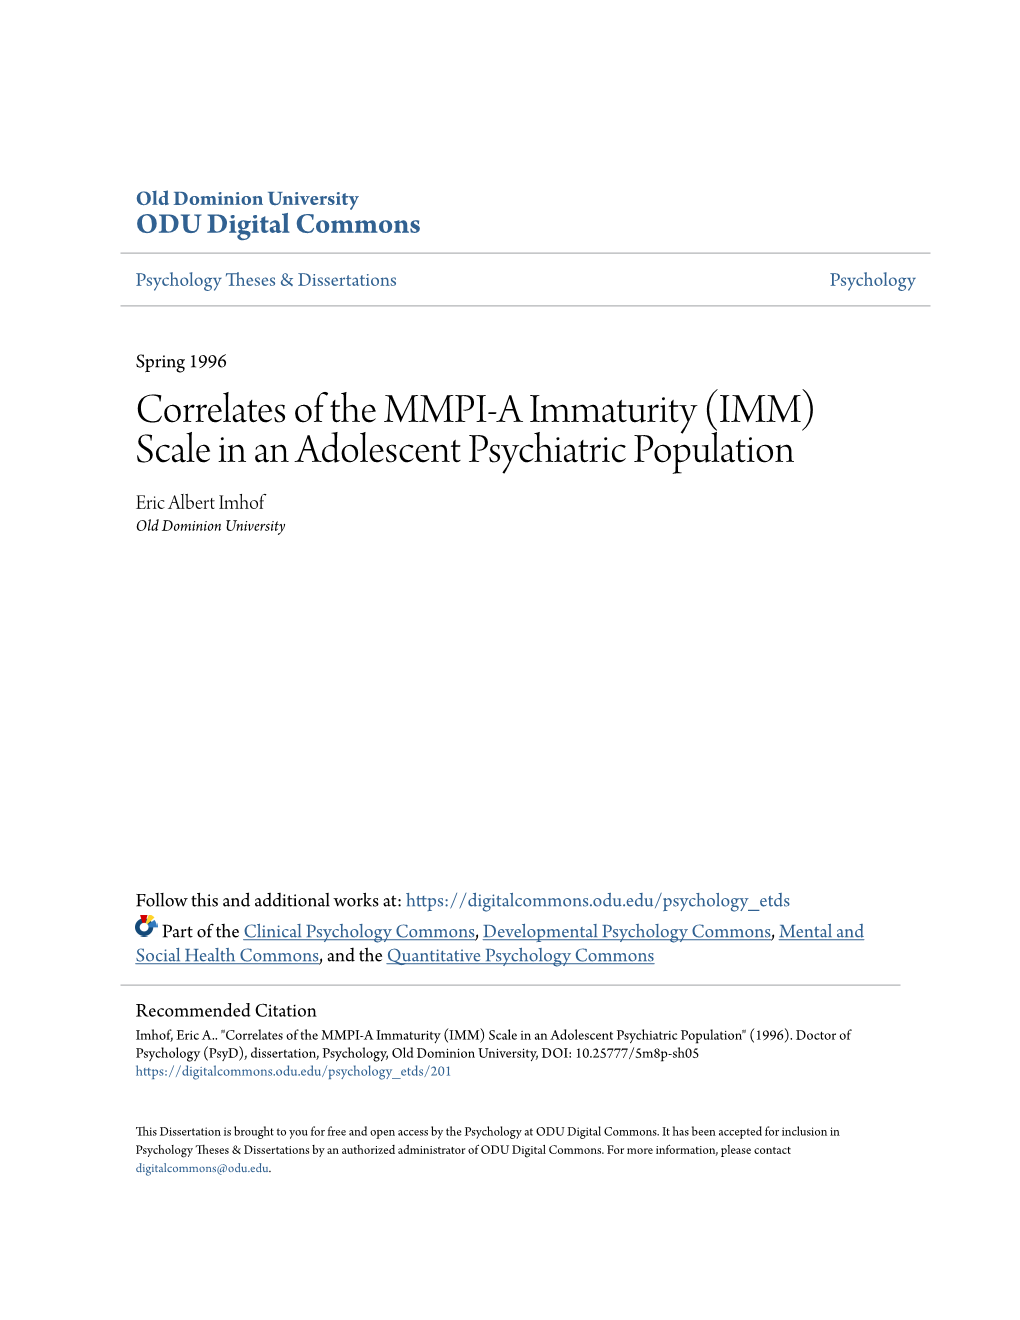 Correlates of the MMPI-A Immaturity (IMM) Scale in an Adolescent Psychiatric Population Eric Albert Imhof Old Dominion University